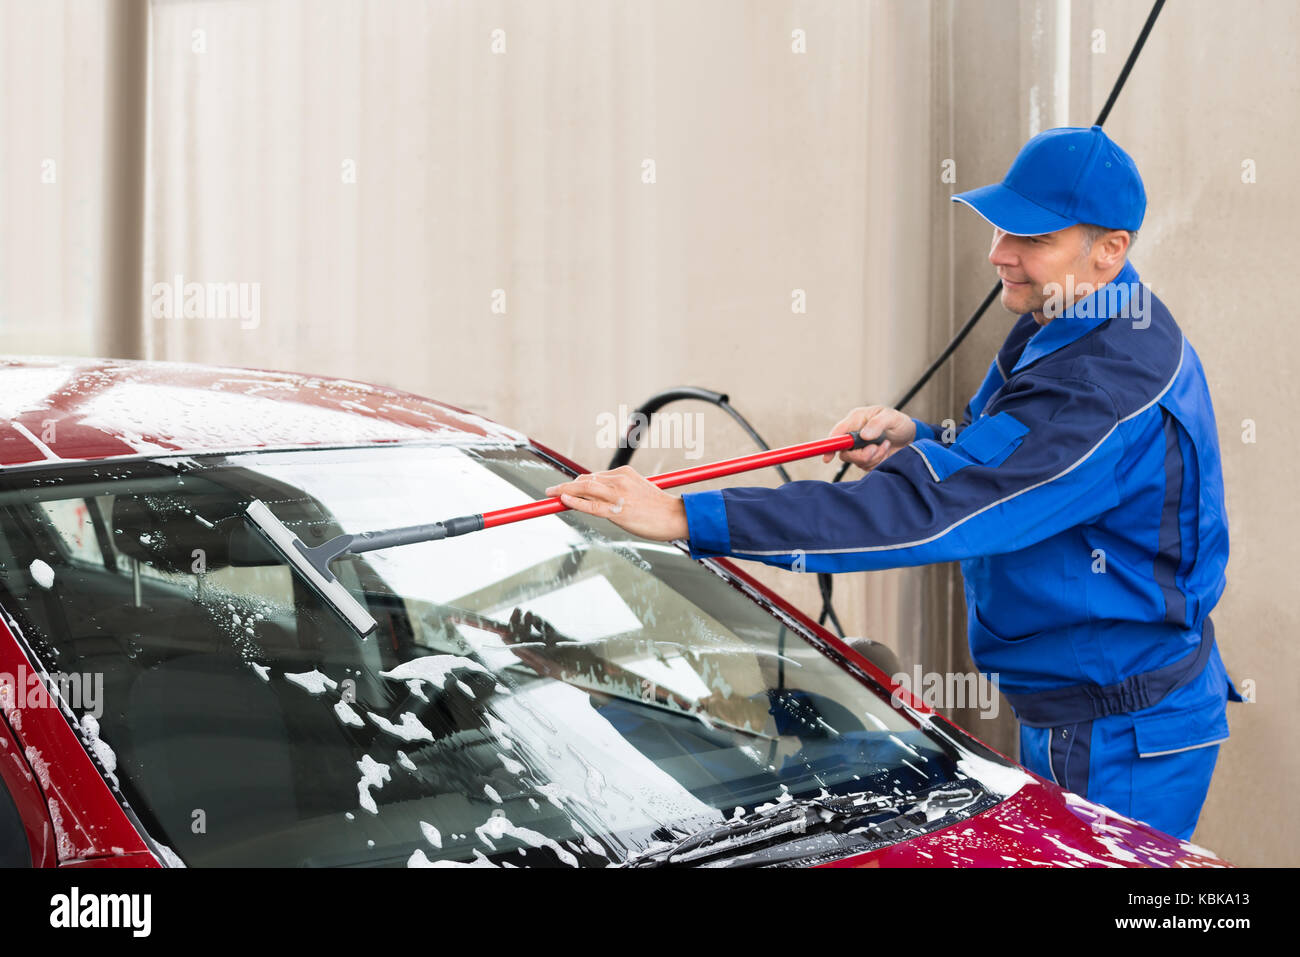 Cropped image of manual worker washing windshield of car at service station Stock Photo